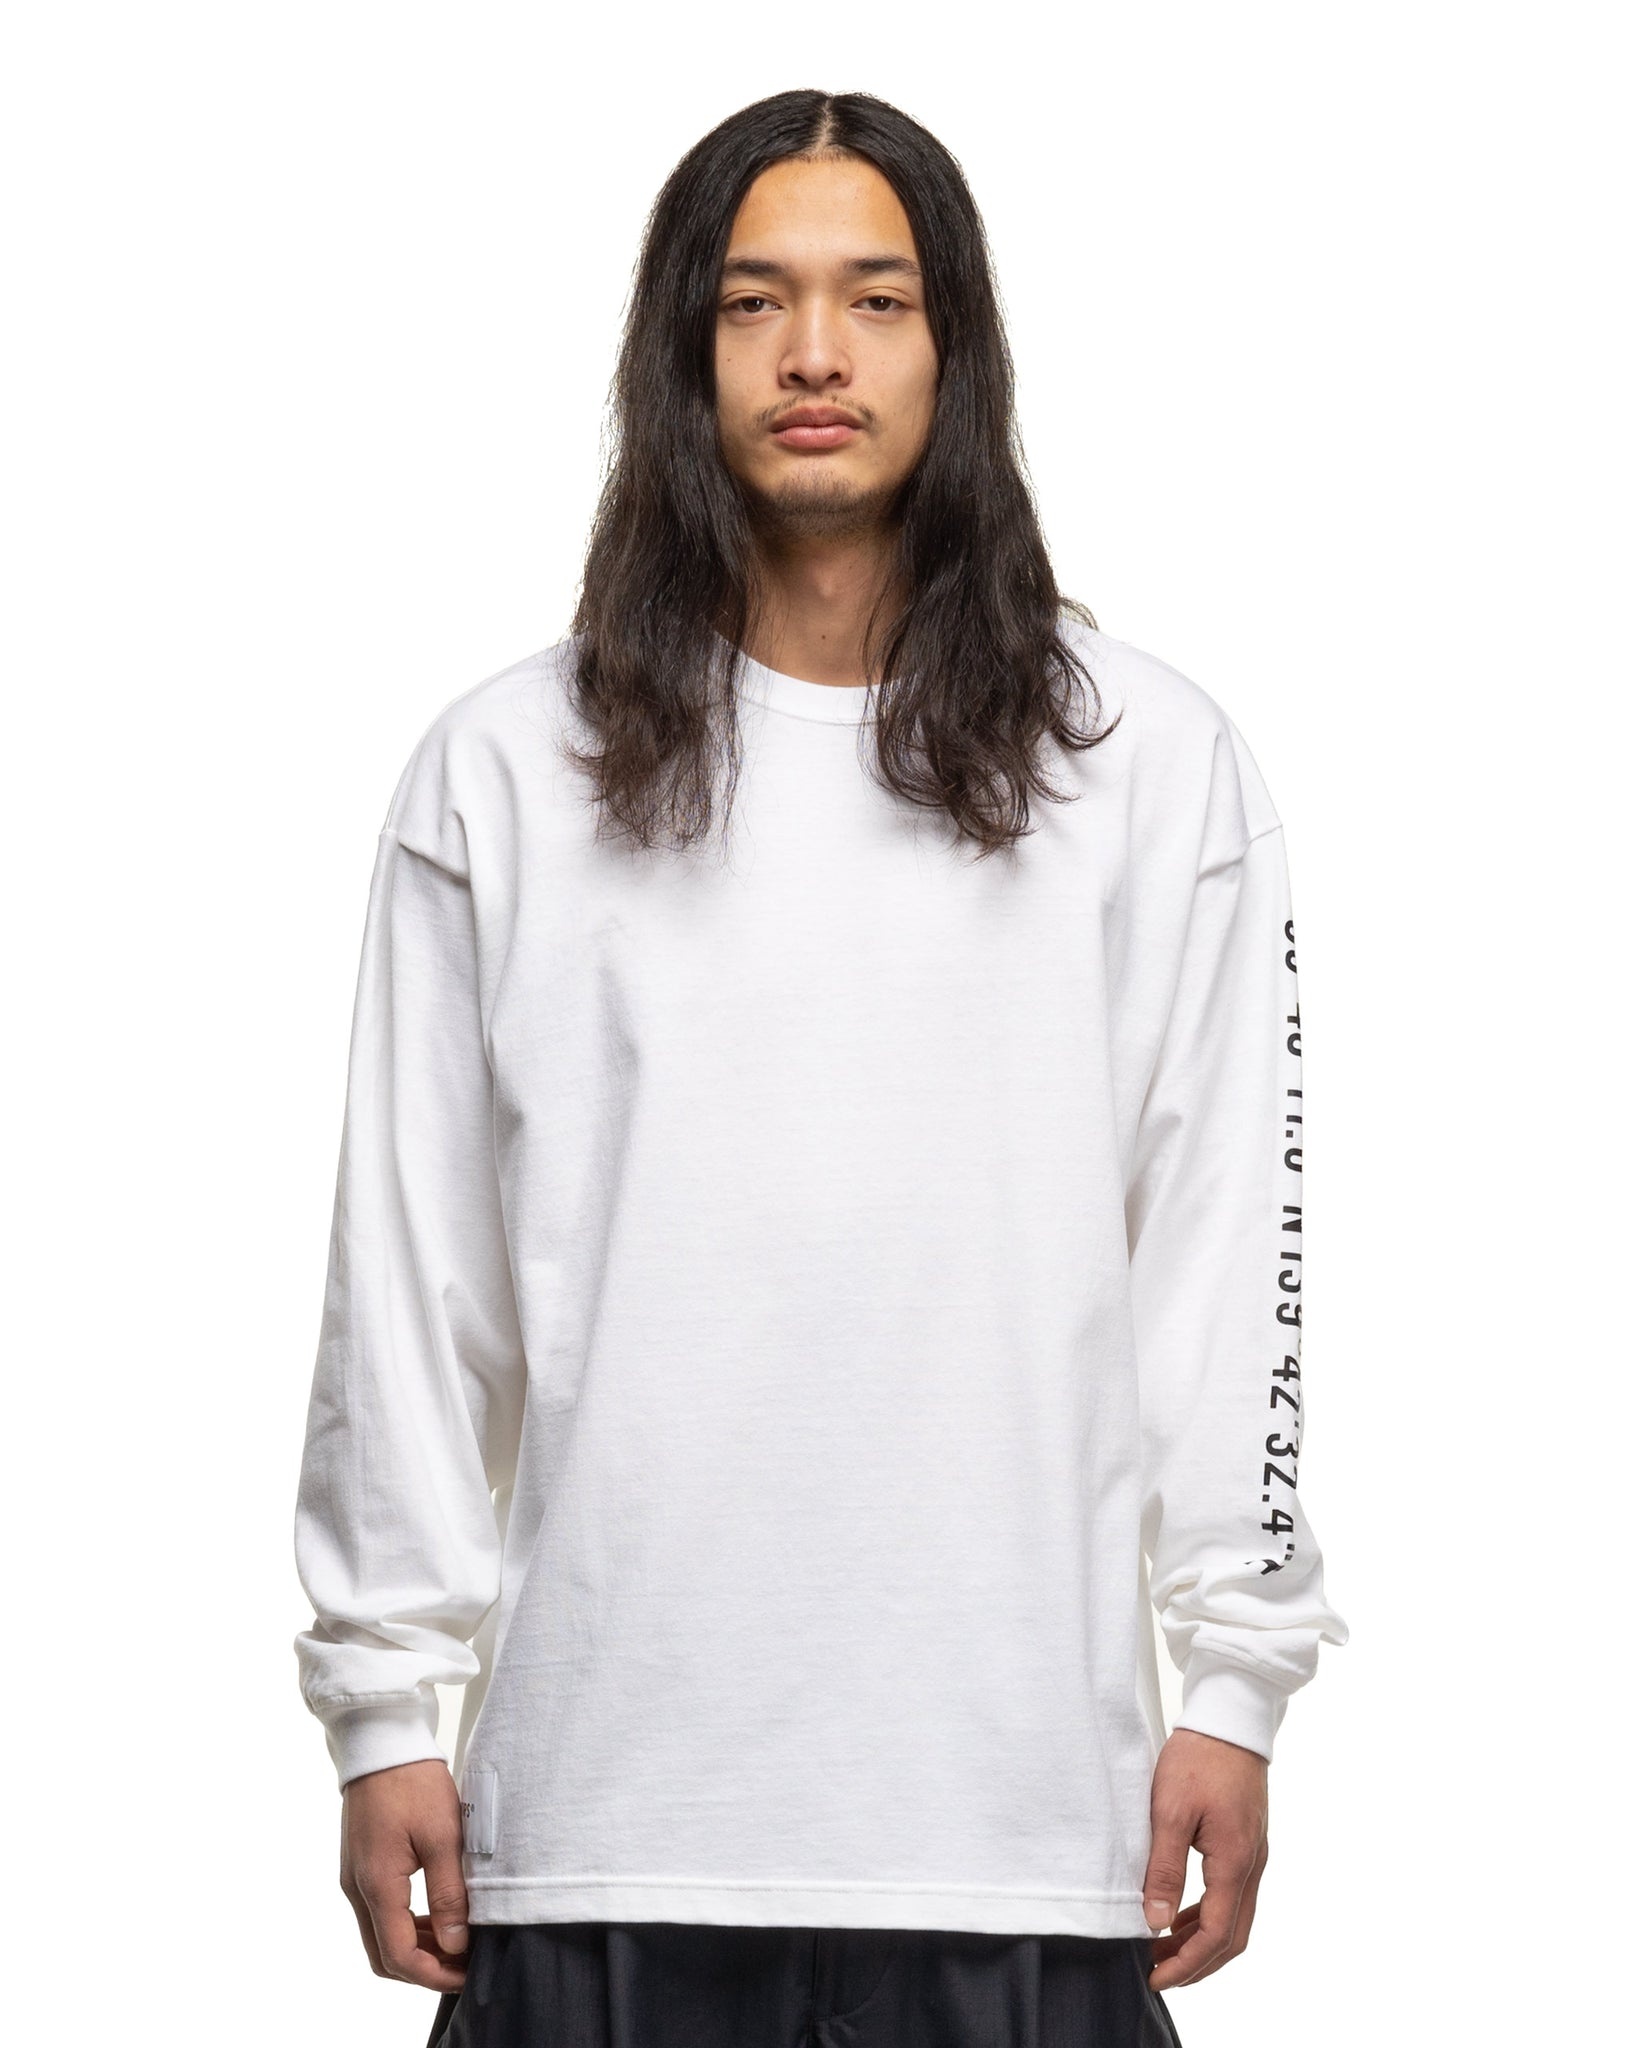 OBJ 03 / LS / Cotton. Fortless Pullover WHITE - 4